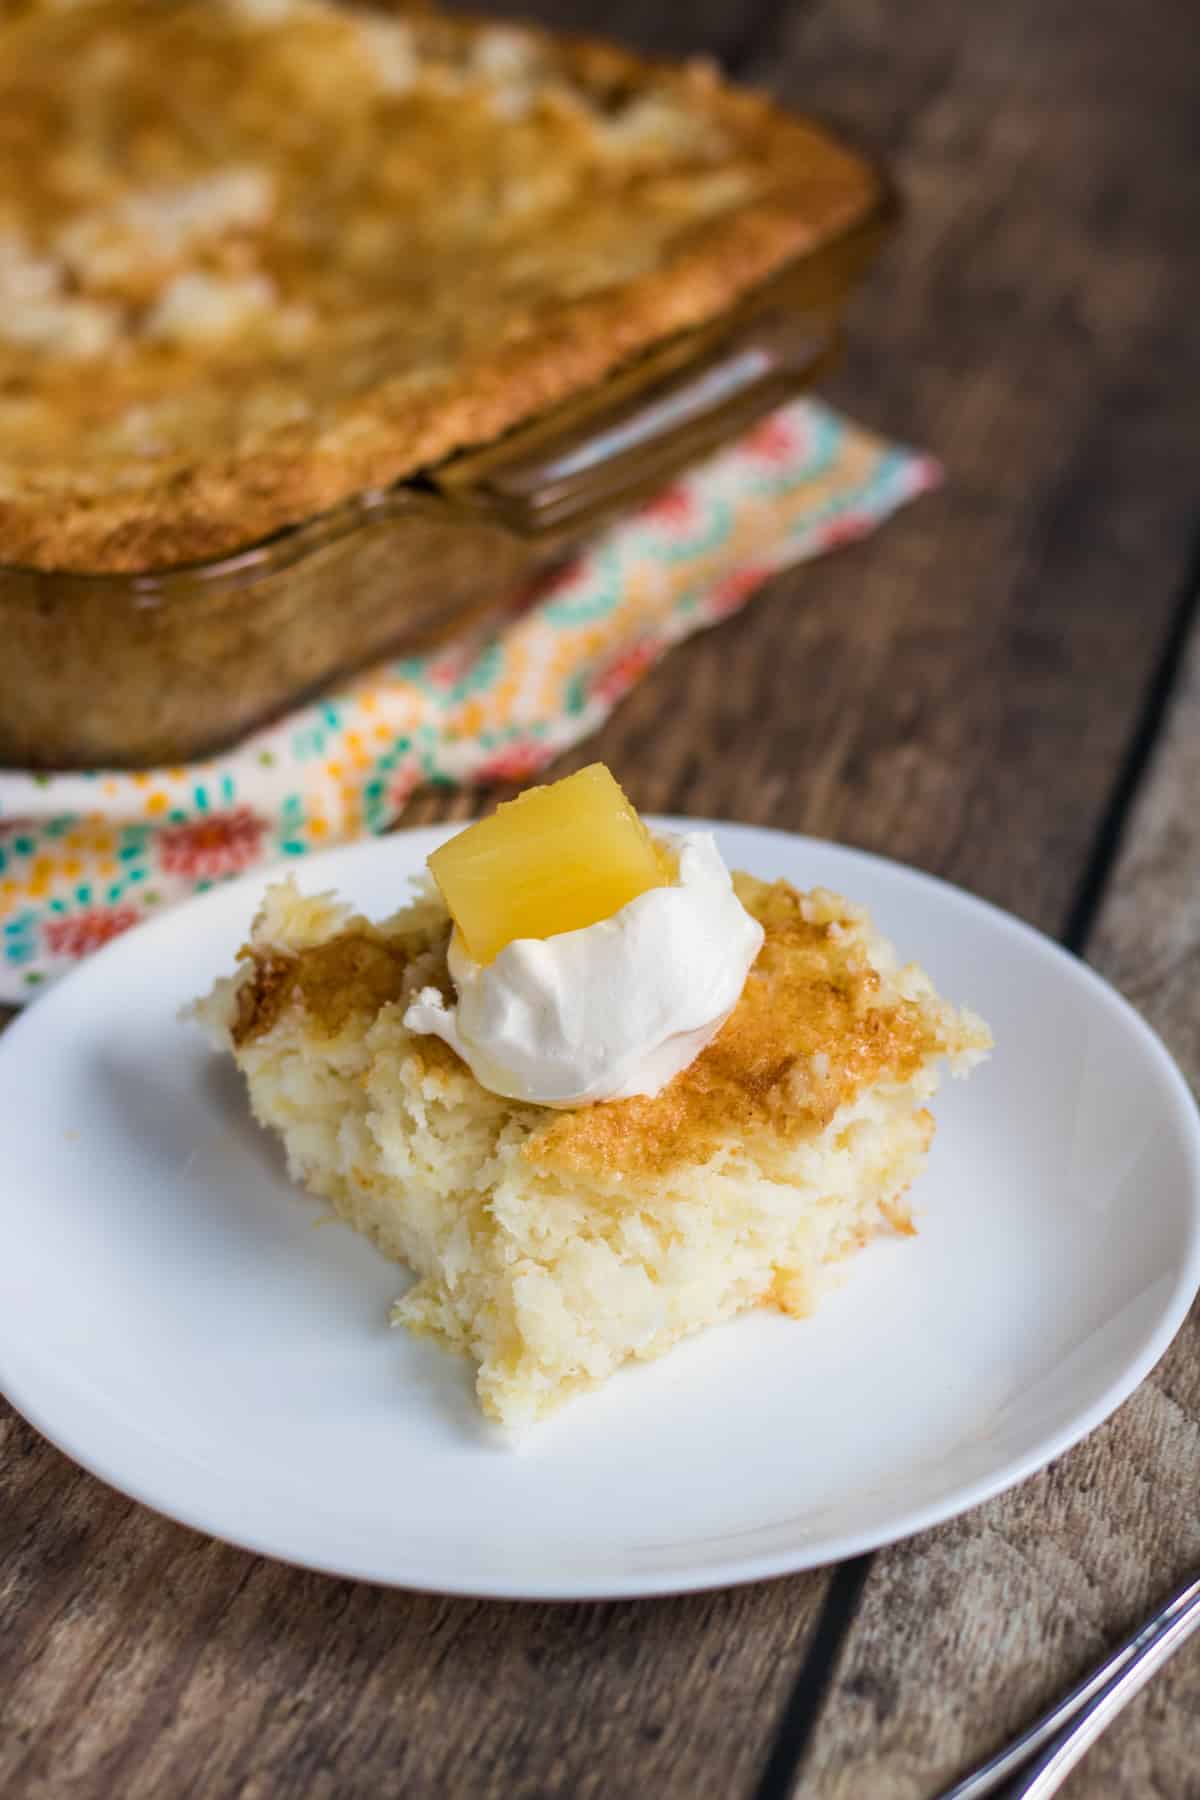 Square slice of angel food cake with golden brown top on a white plate. Cake is topped with a dollop of whipped topping and a chunk of pineapple . Rectangular baking dish with cake in background.